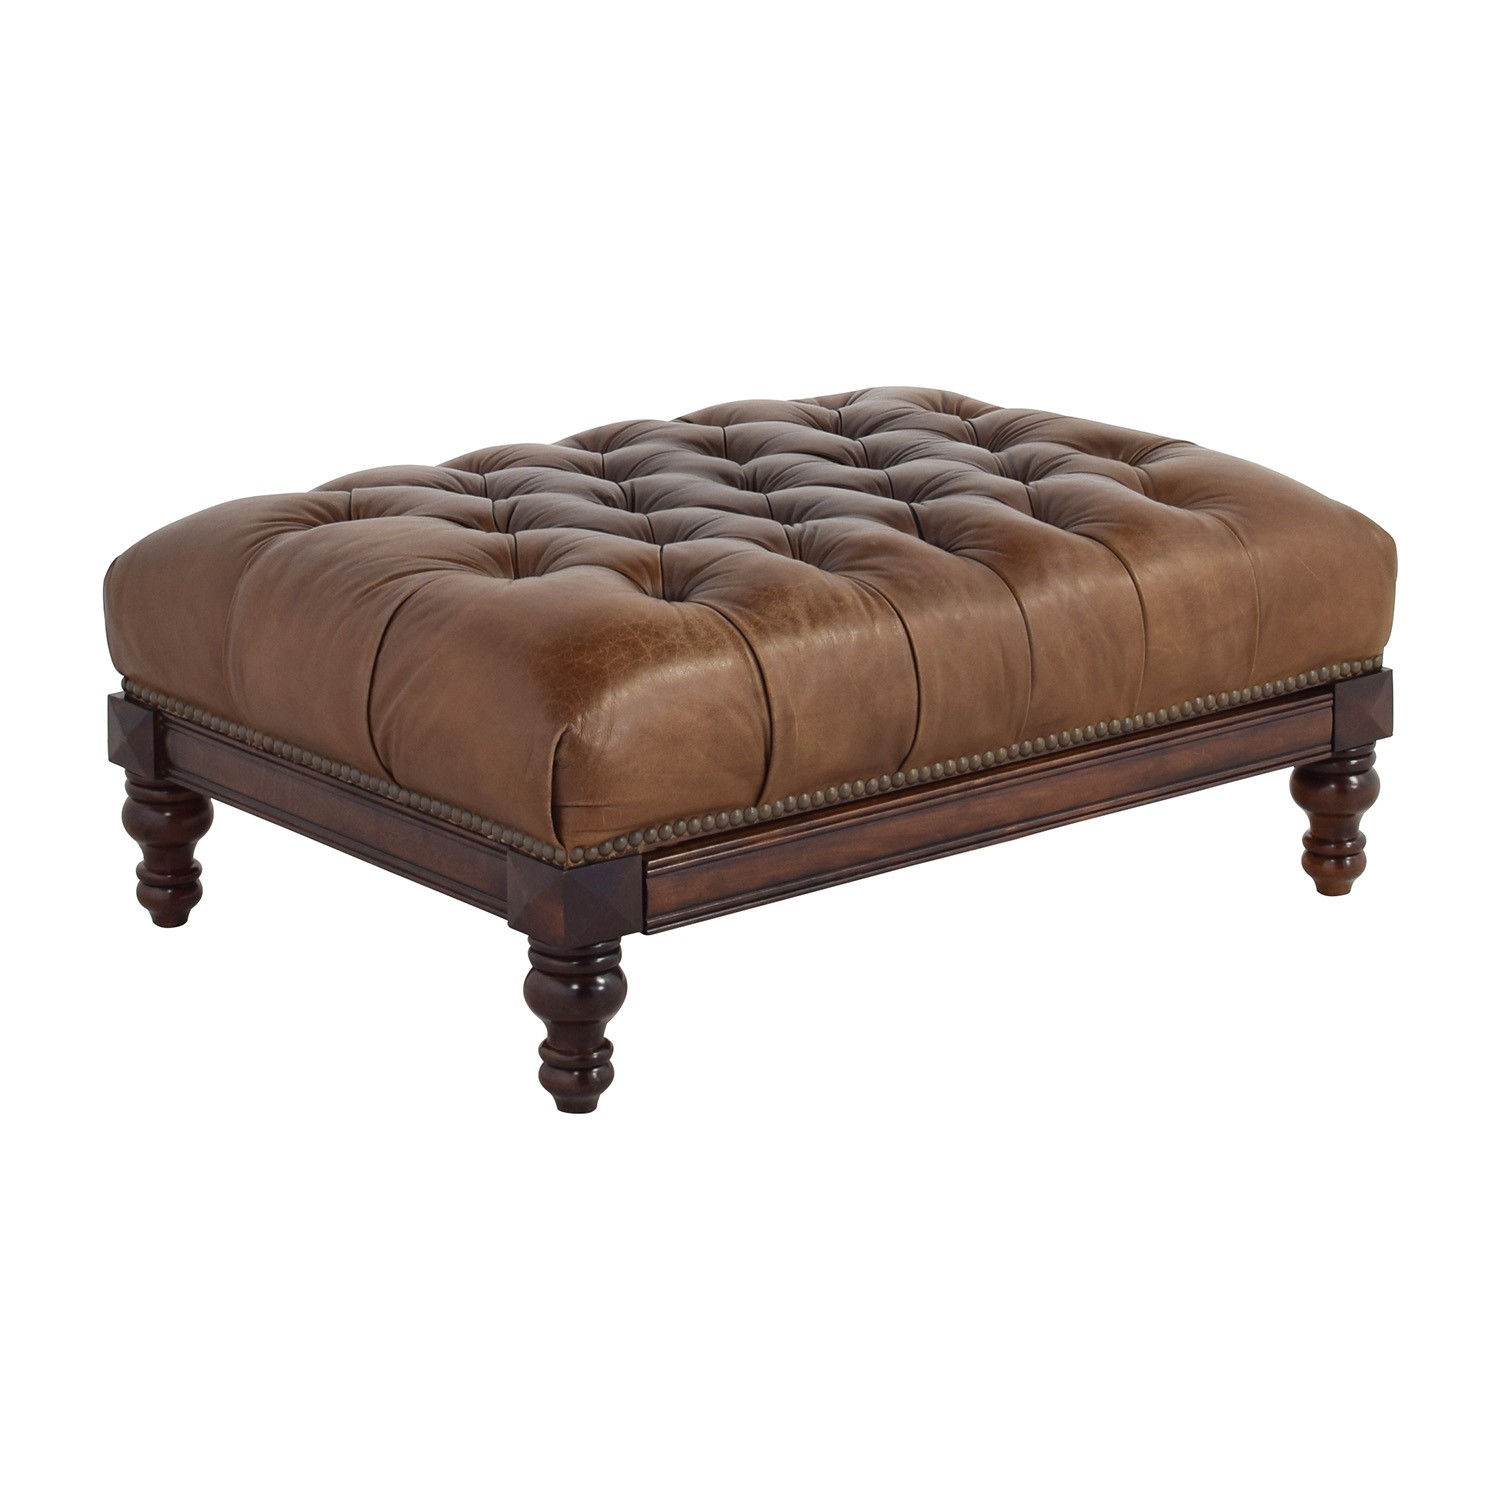 77 off antique tufted leather ottoman with secret 1